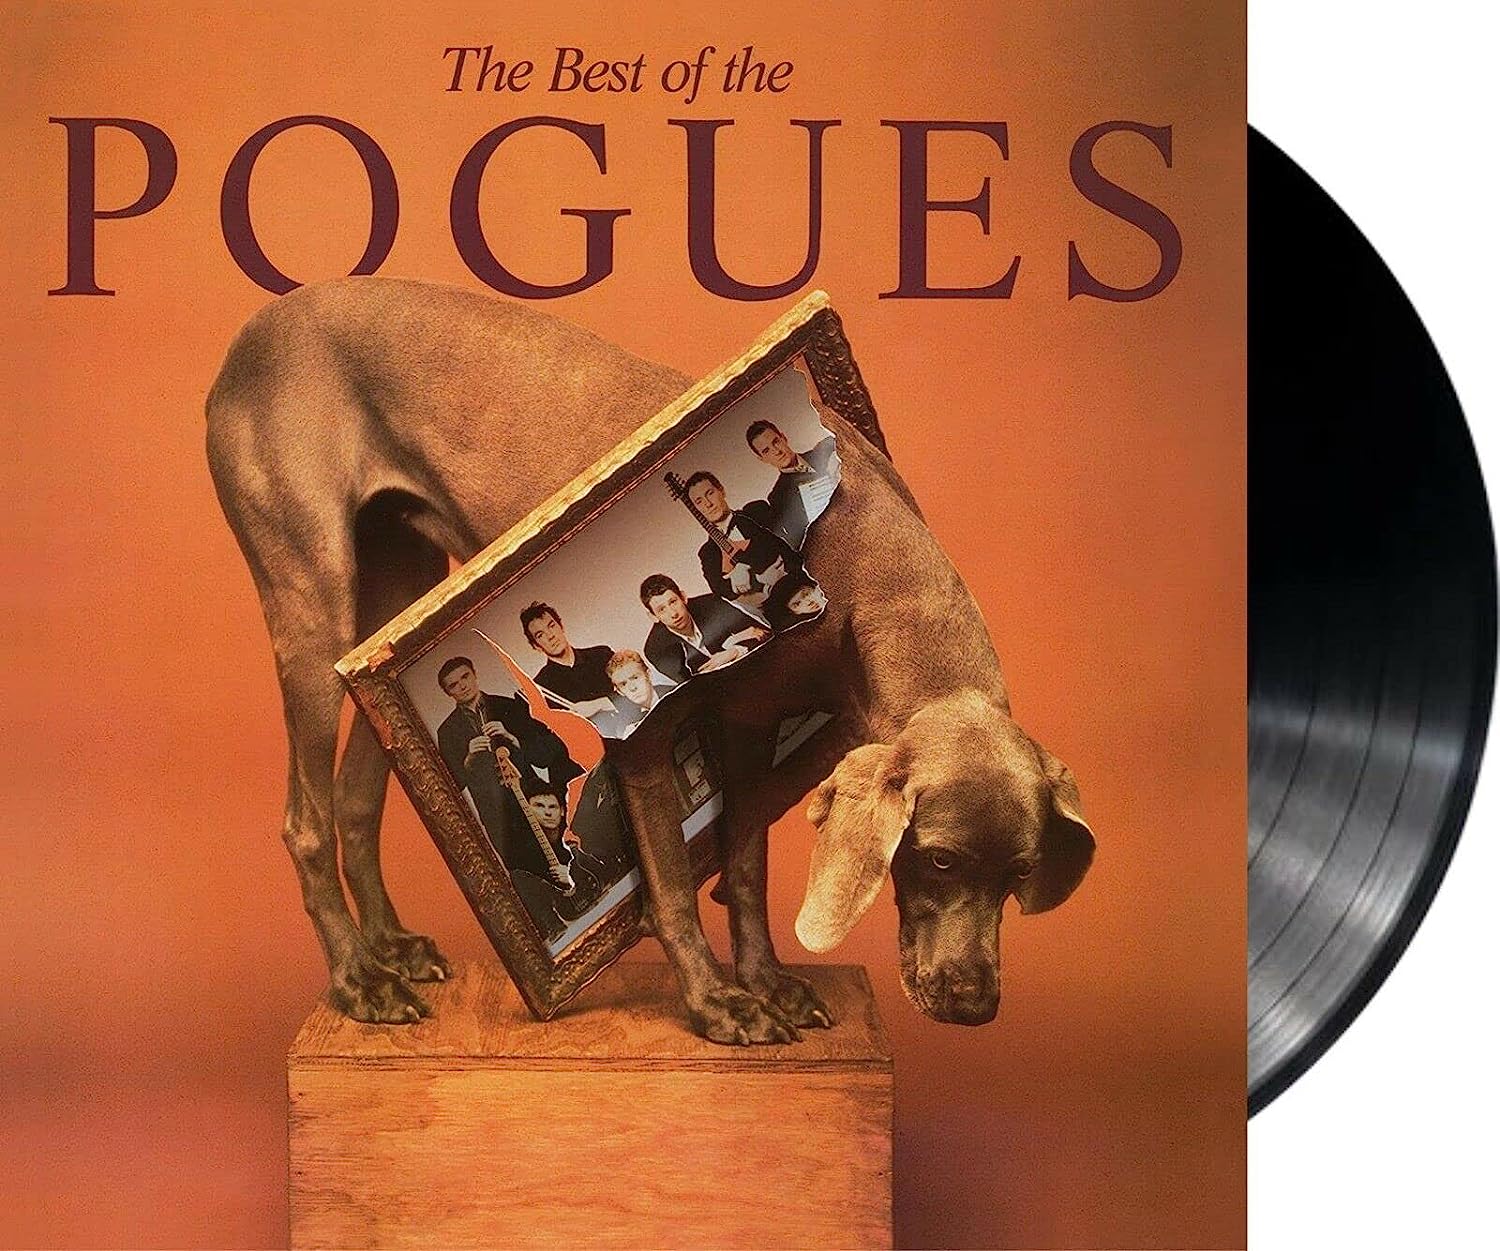 The Pogues - The Best of The Pogues